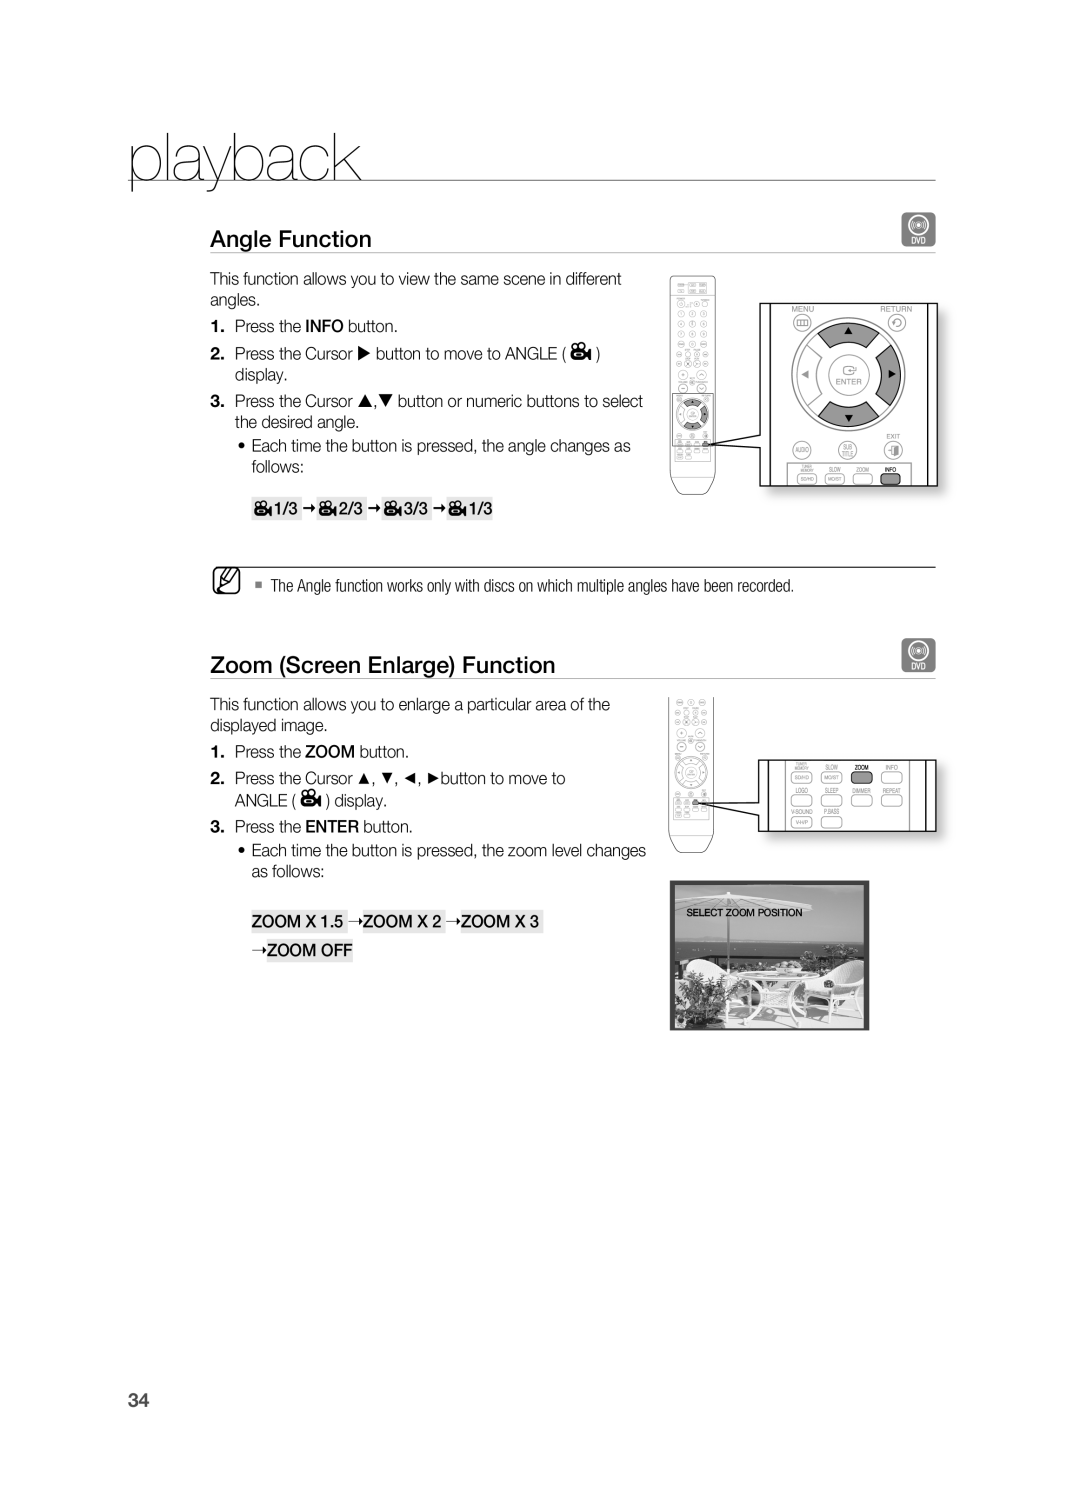 Samsung HT-A100 user manual Angle Function, Zoom Screen Enlarge Function, playback 